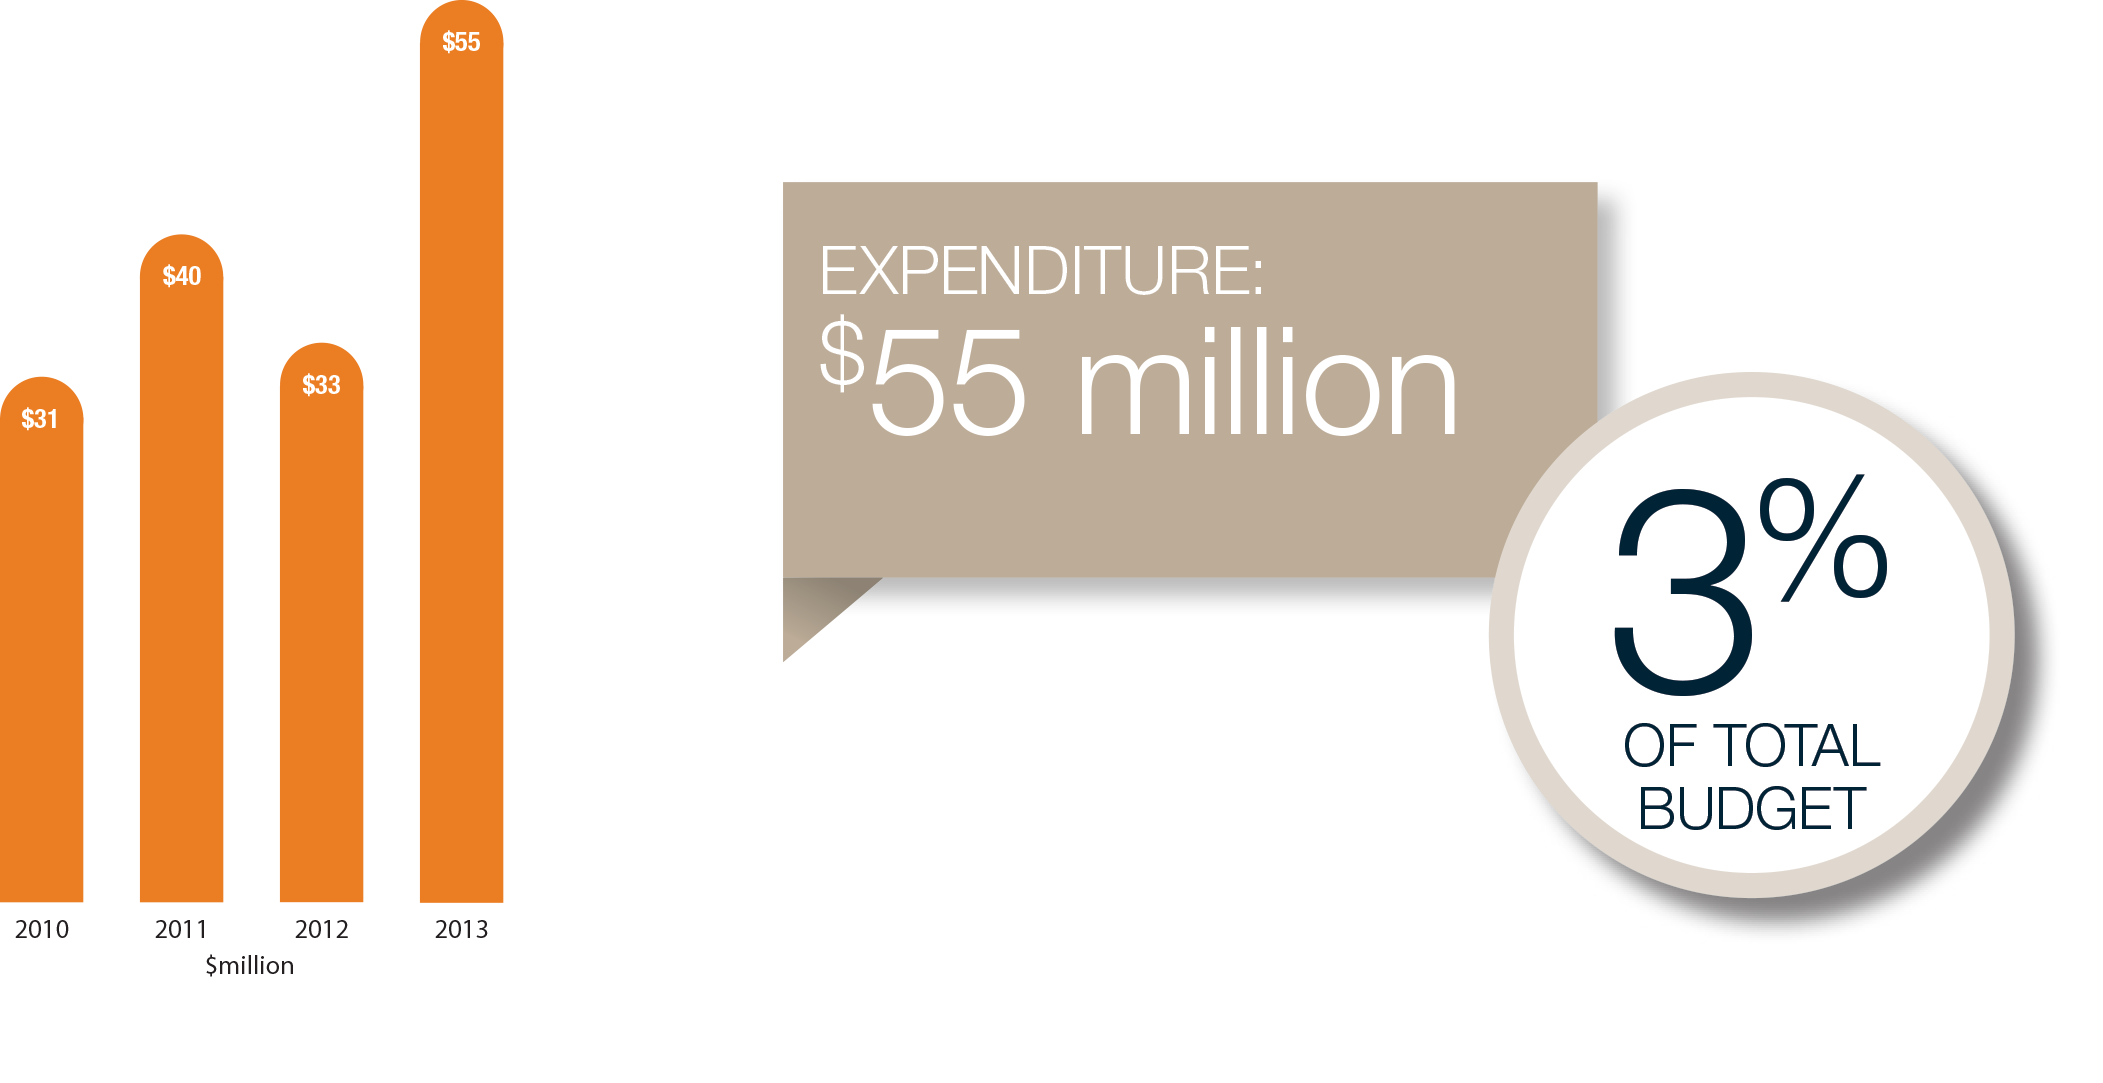 Expenditure in 2013 was $55 million or 3% of the total budget